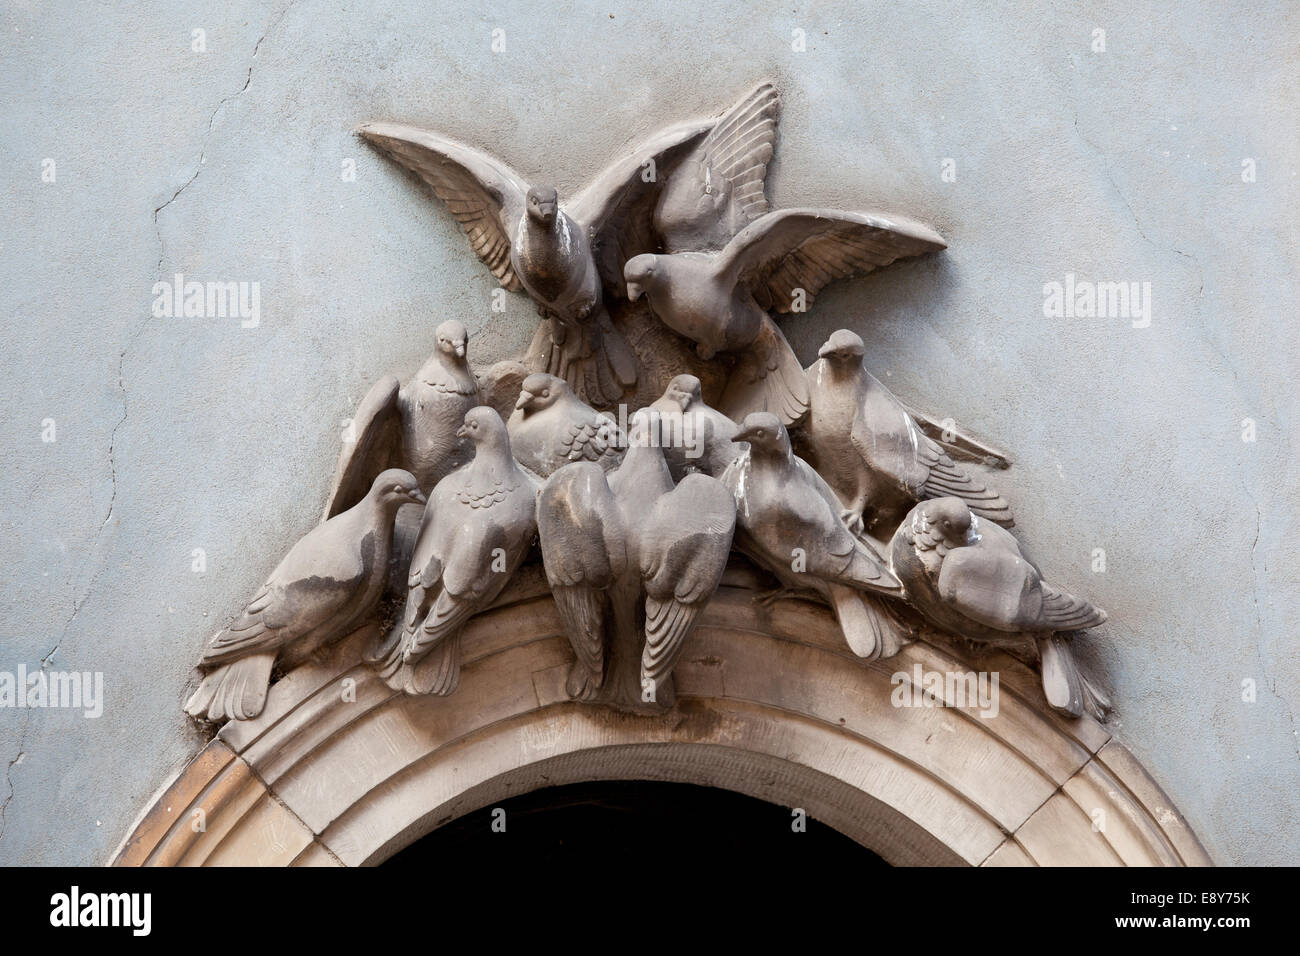 Doves above archway Stock Photo